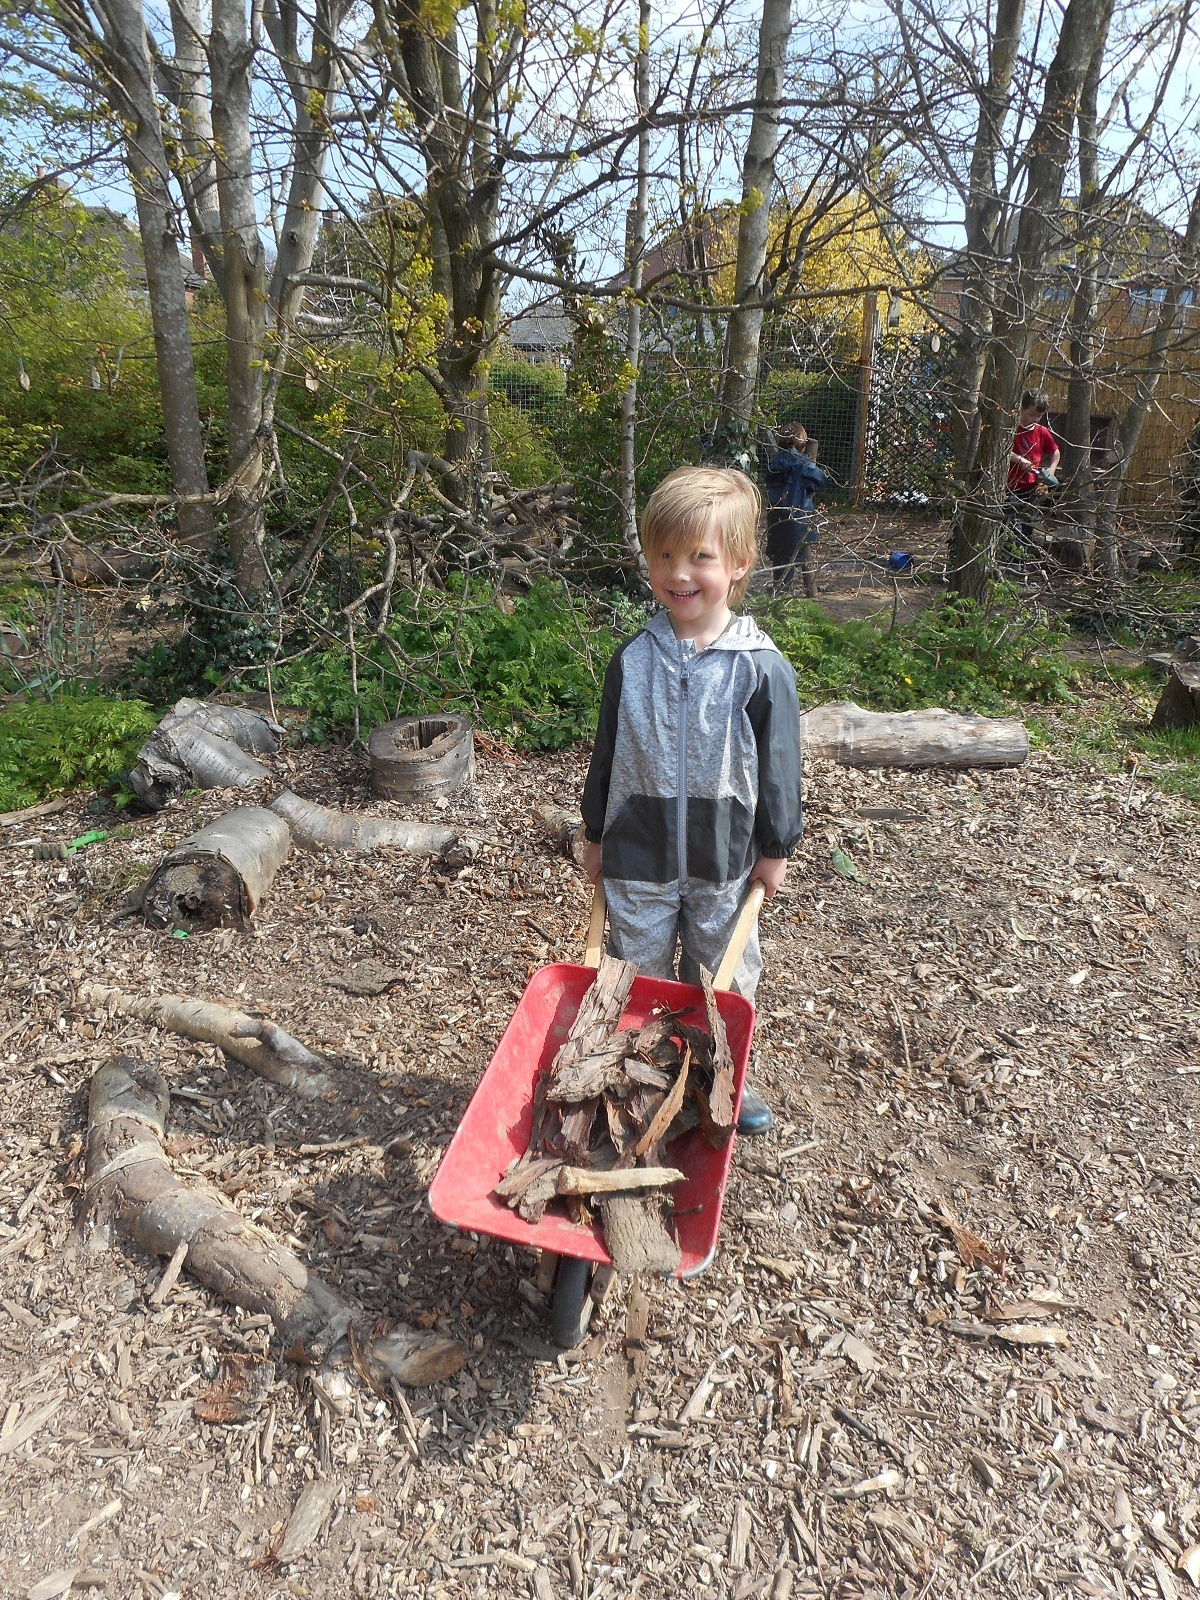 Going places - Ethan Jenner uses a wheelbarrow in the forest school